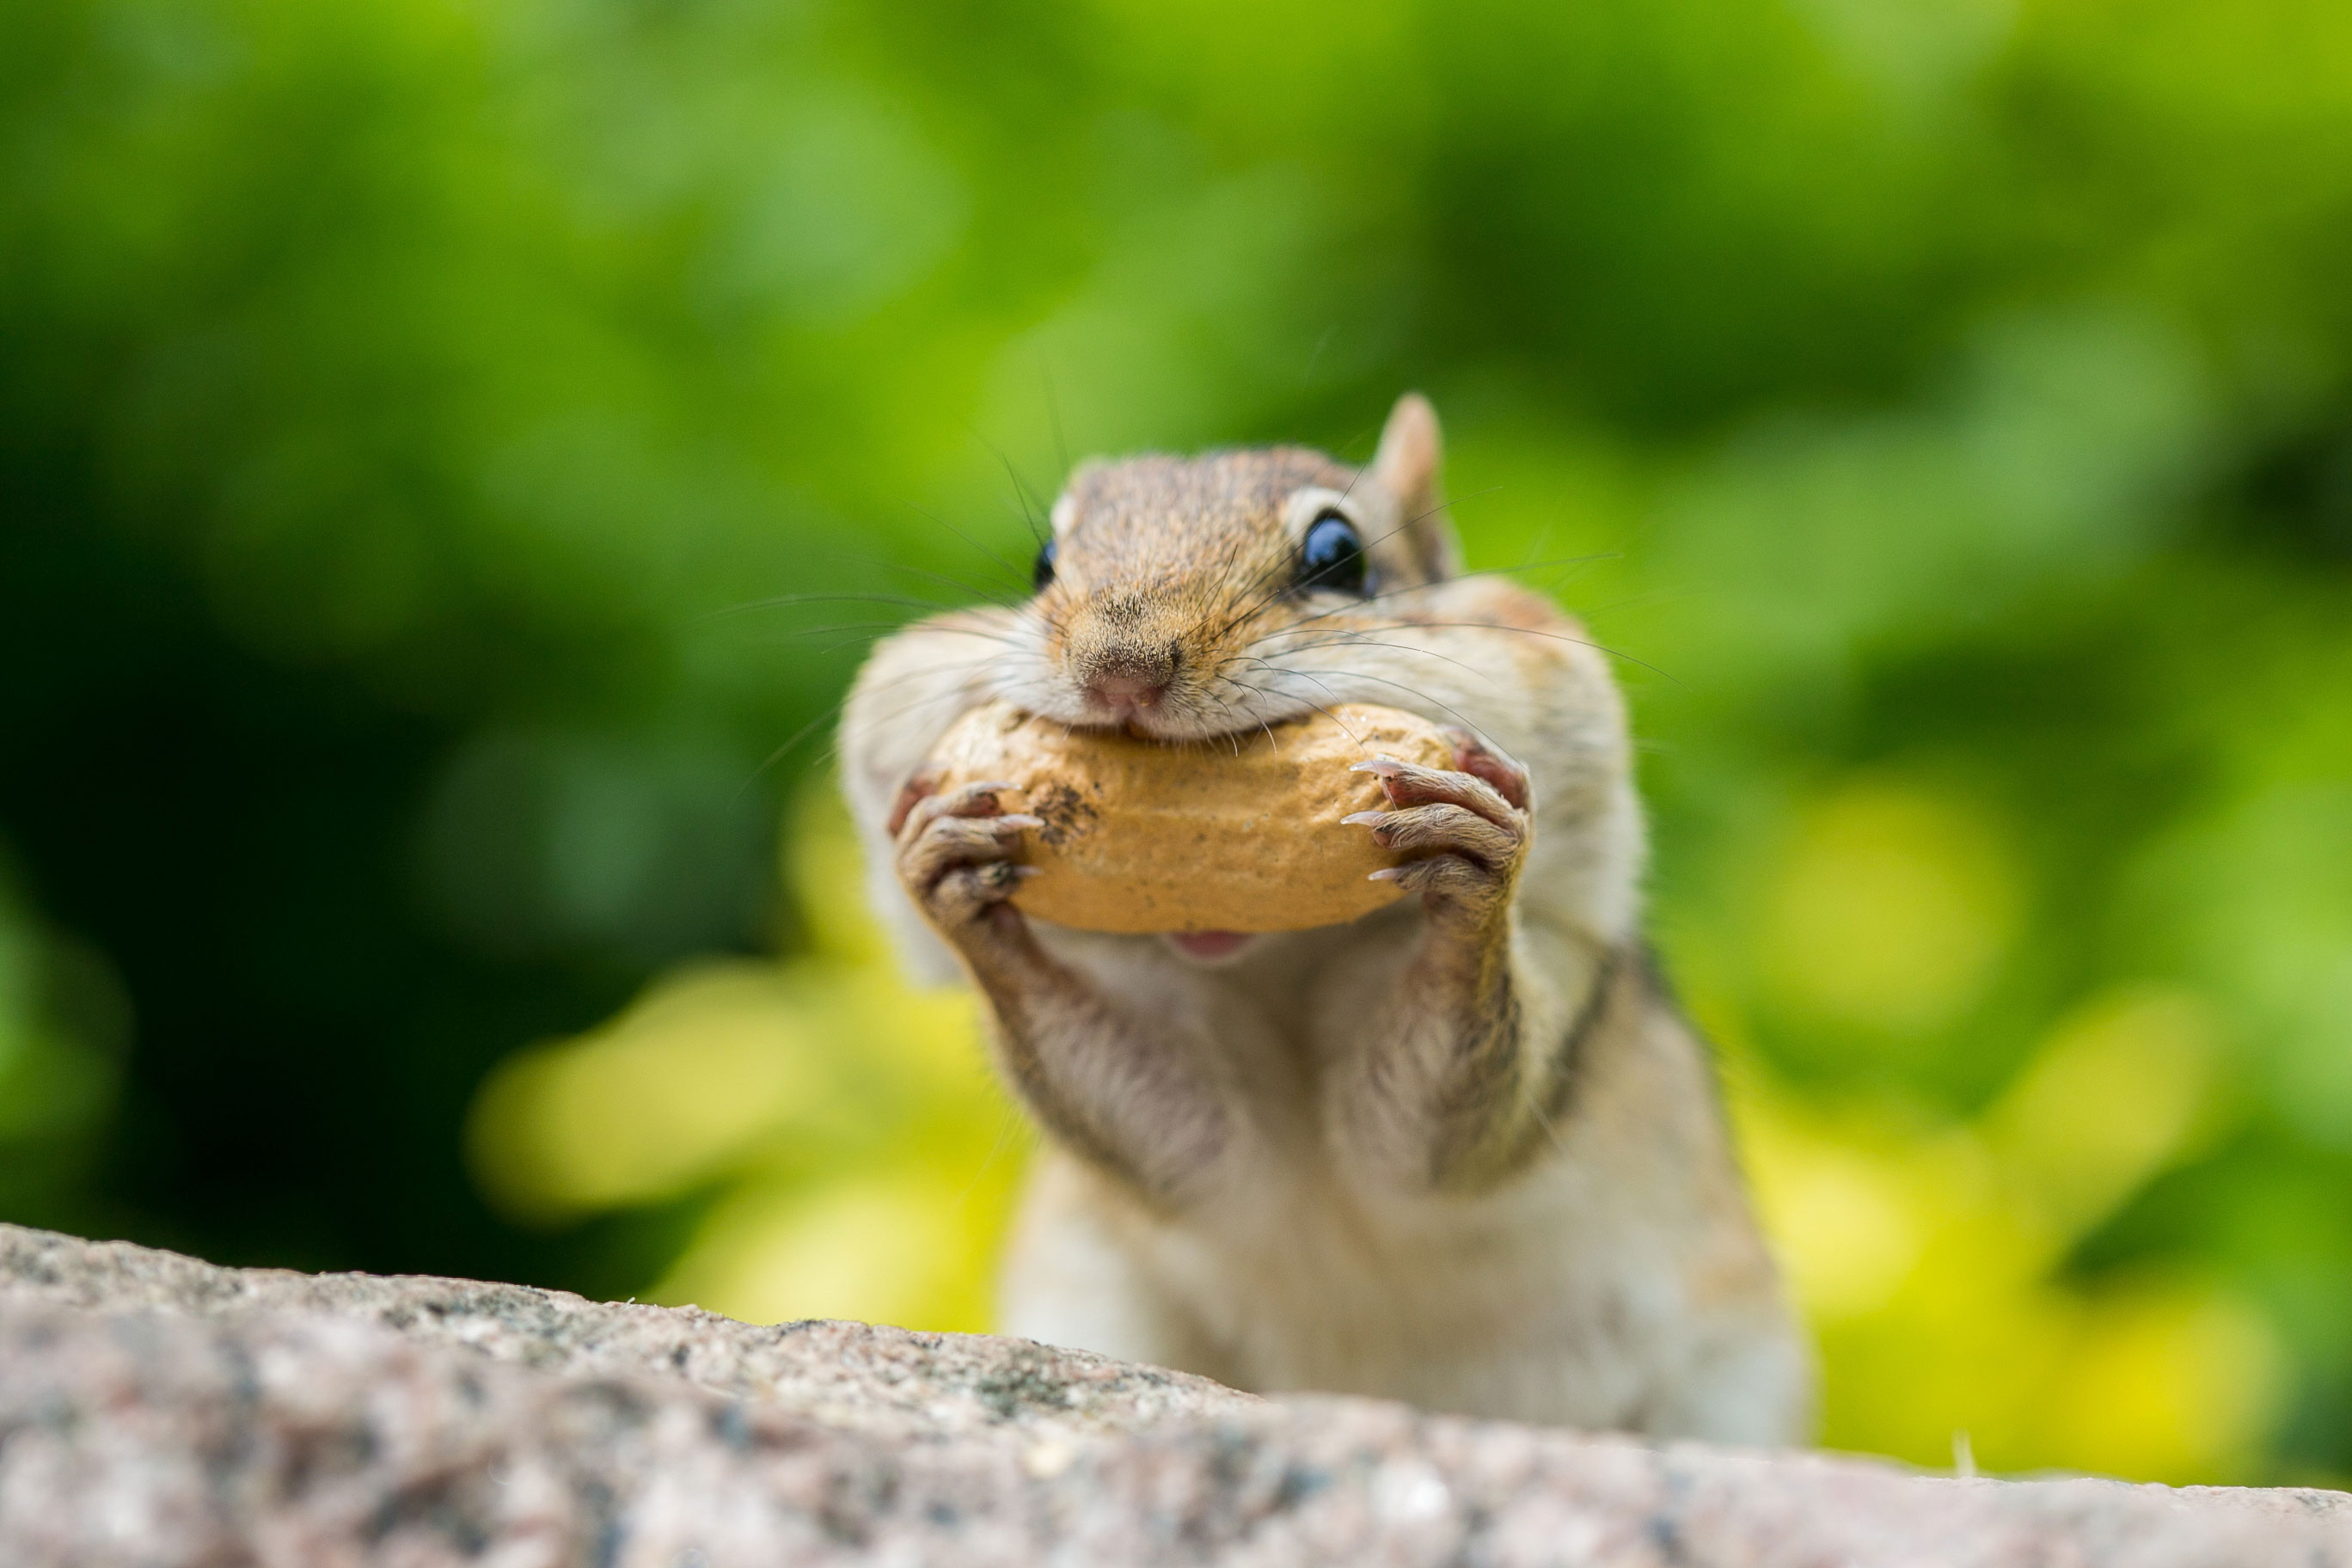 A chipmunk with a peanut in its mouth.